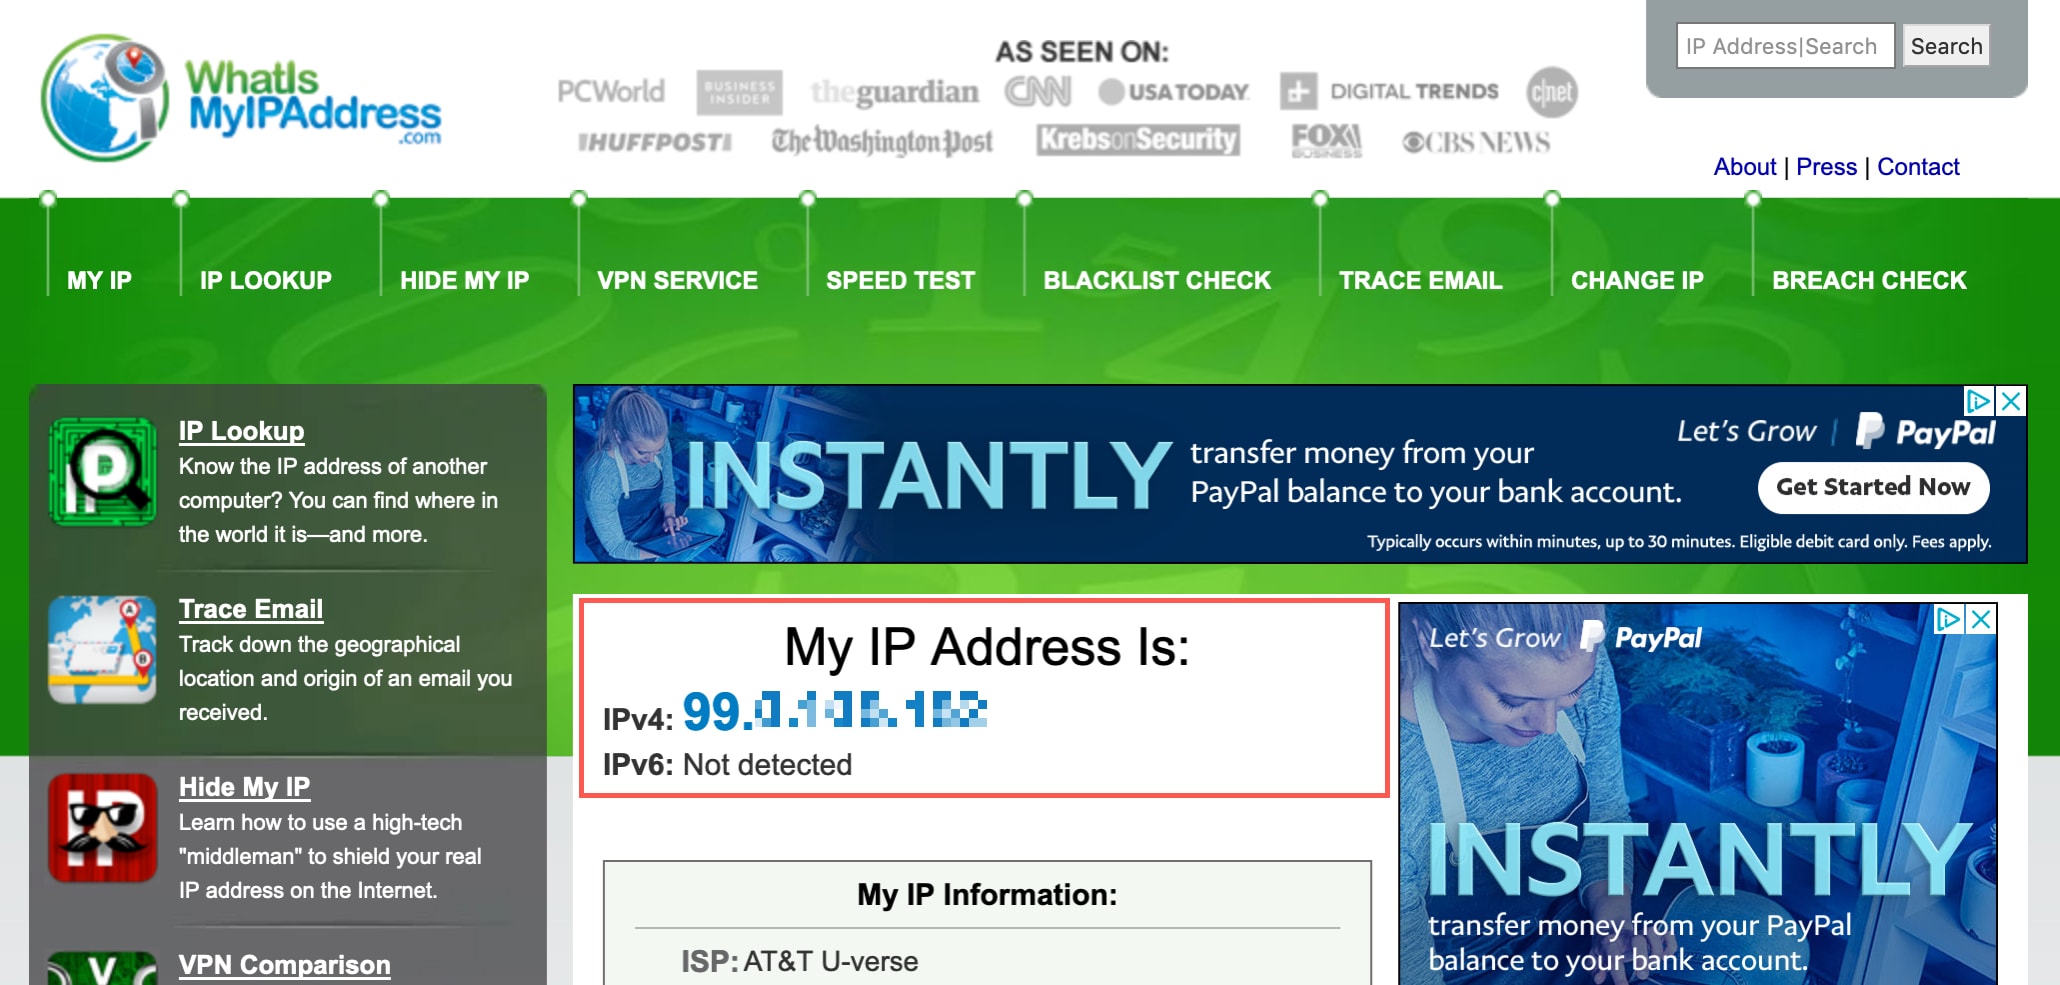 What-Is-My-IP-Address-Website-for-Mac